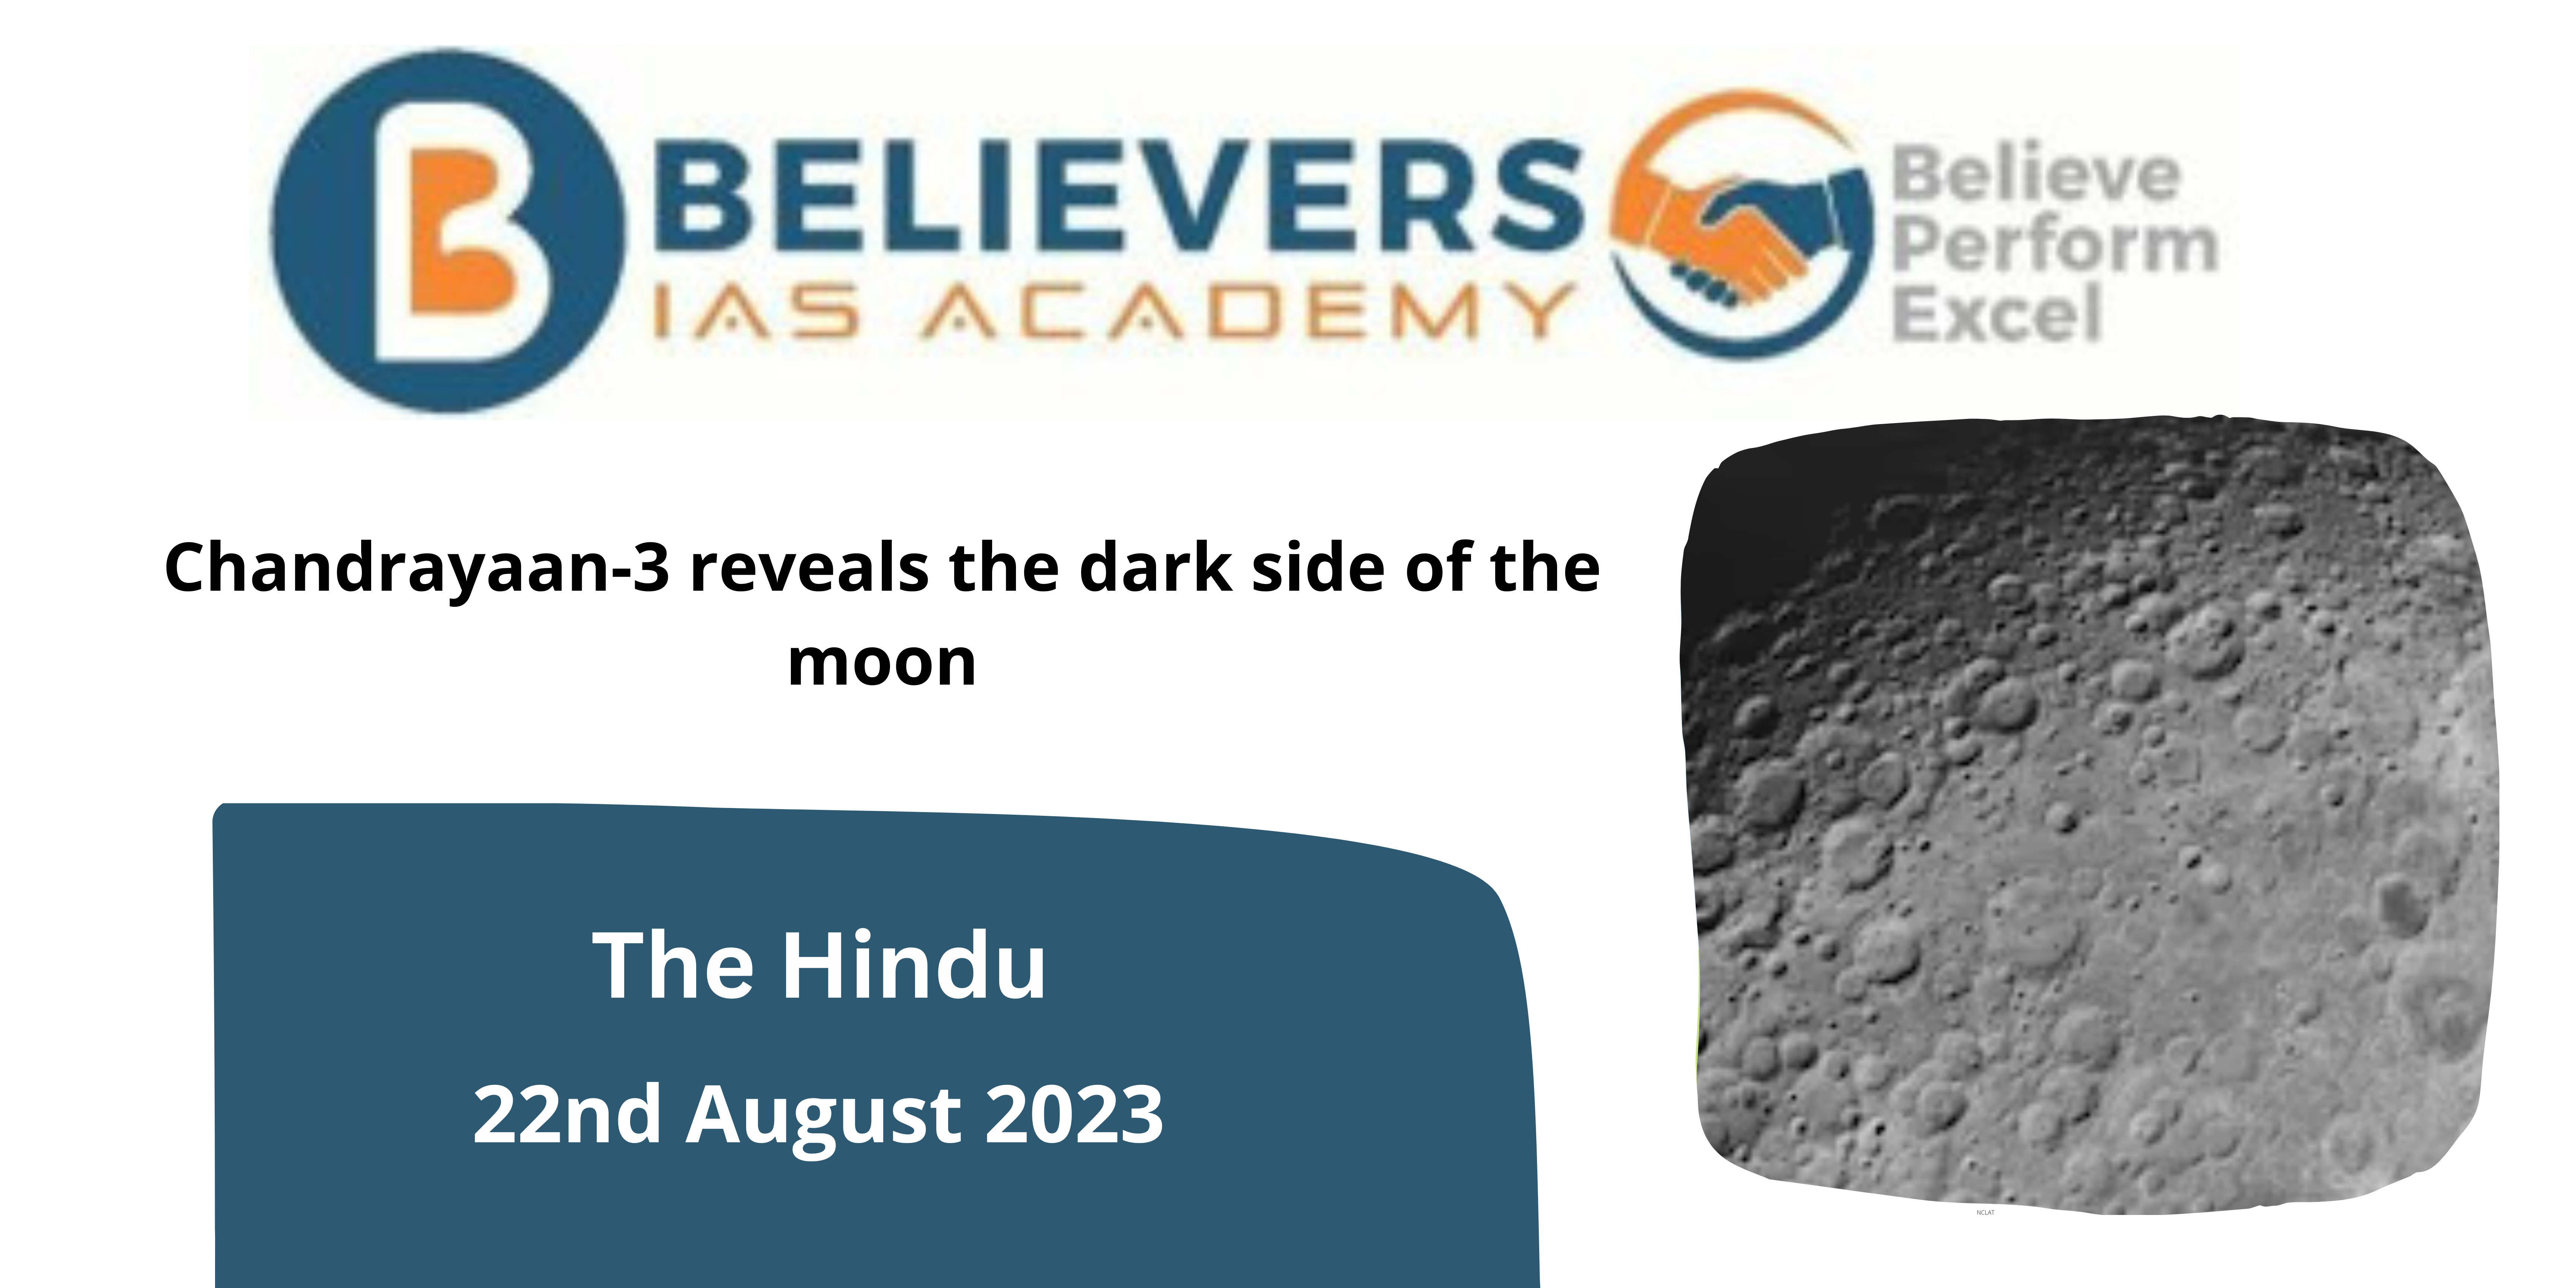 Chandrayaan-3: Revealing the Dark Side of the Moon